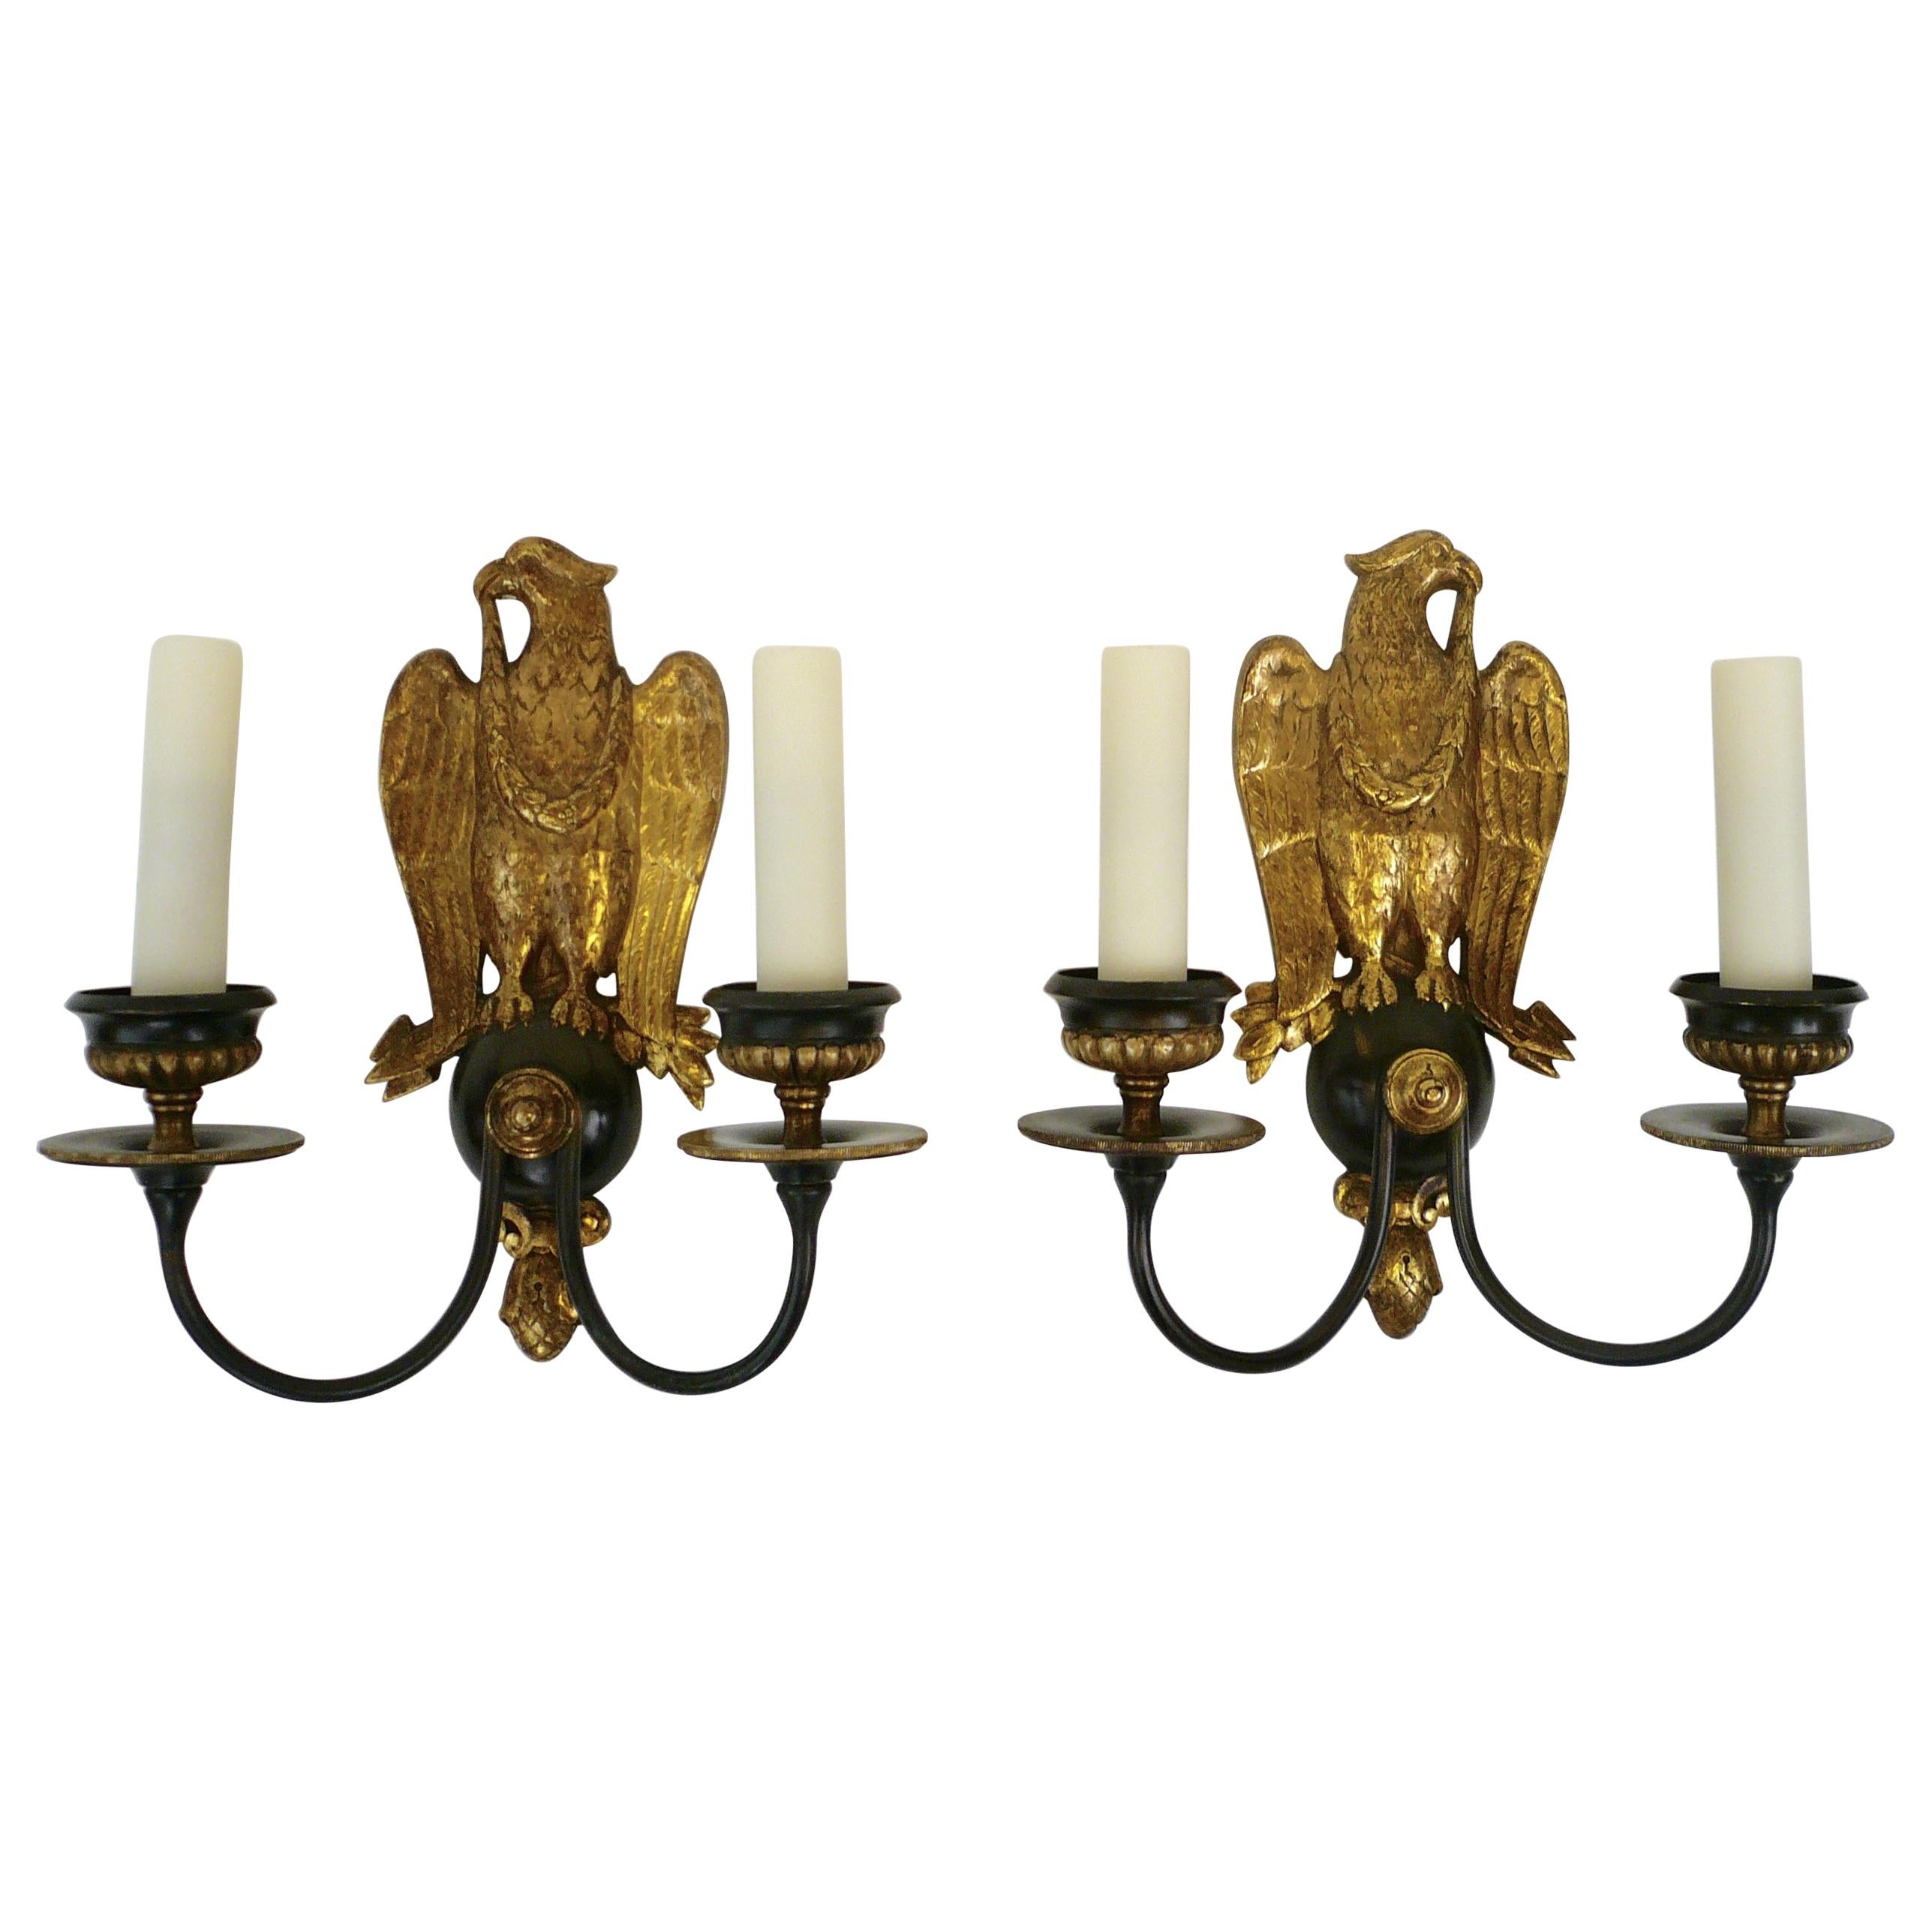 Pair of Regency Style Bronze Eagle Sconces Attributed to E, F, Caldwell